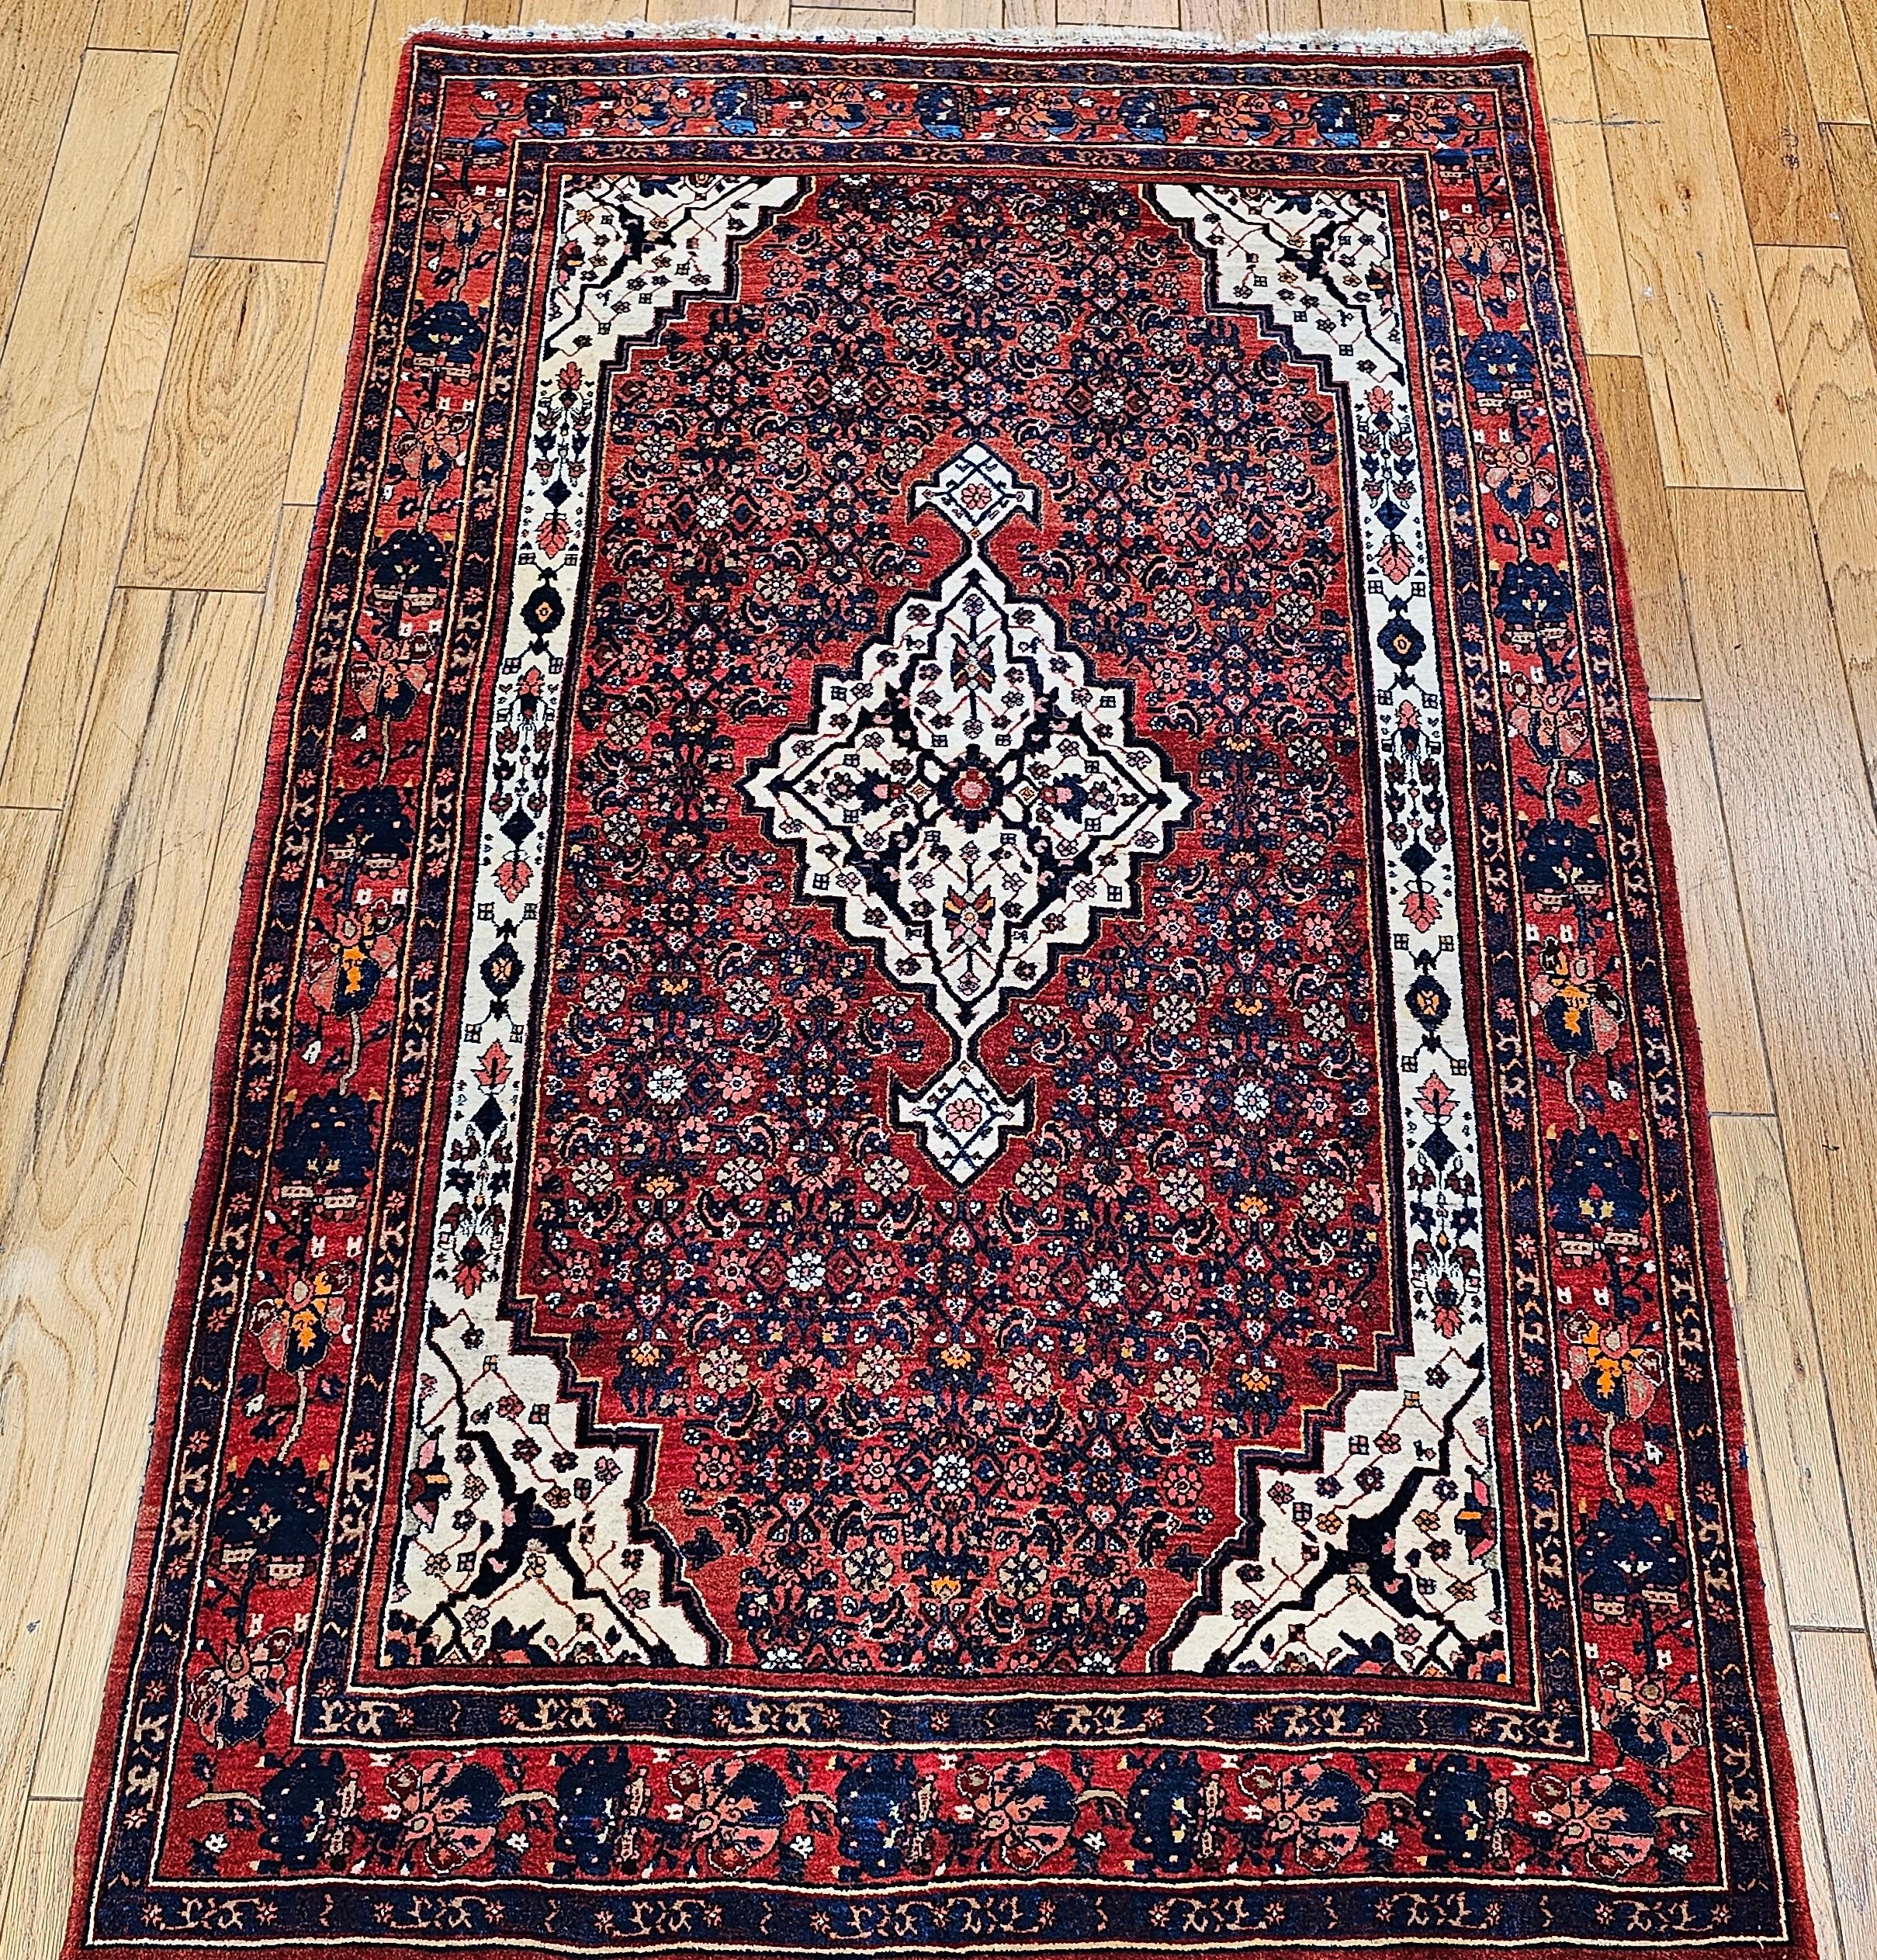 Vintage Persian Bidjar area rug from the early 20th century in a medallion pattern set on a Herati field design.   The Bidjar rug has a central medallion and corner spandrels in a brilliant white color which makes the design stand out. The use of